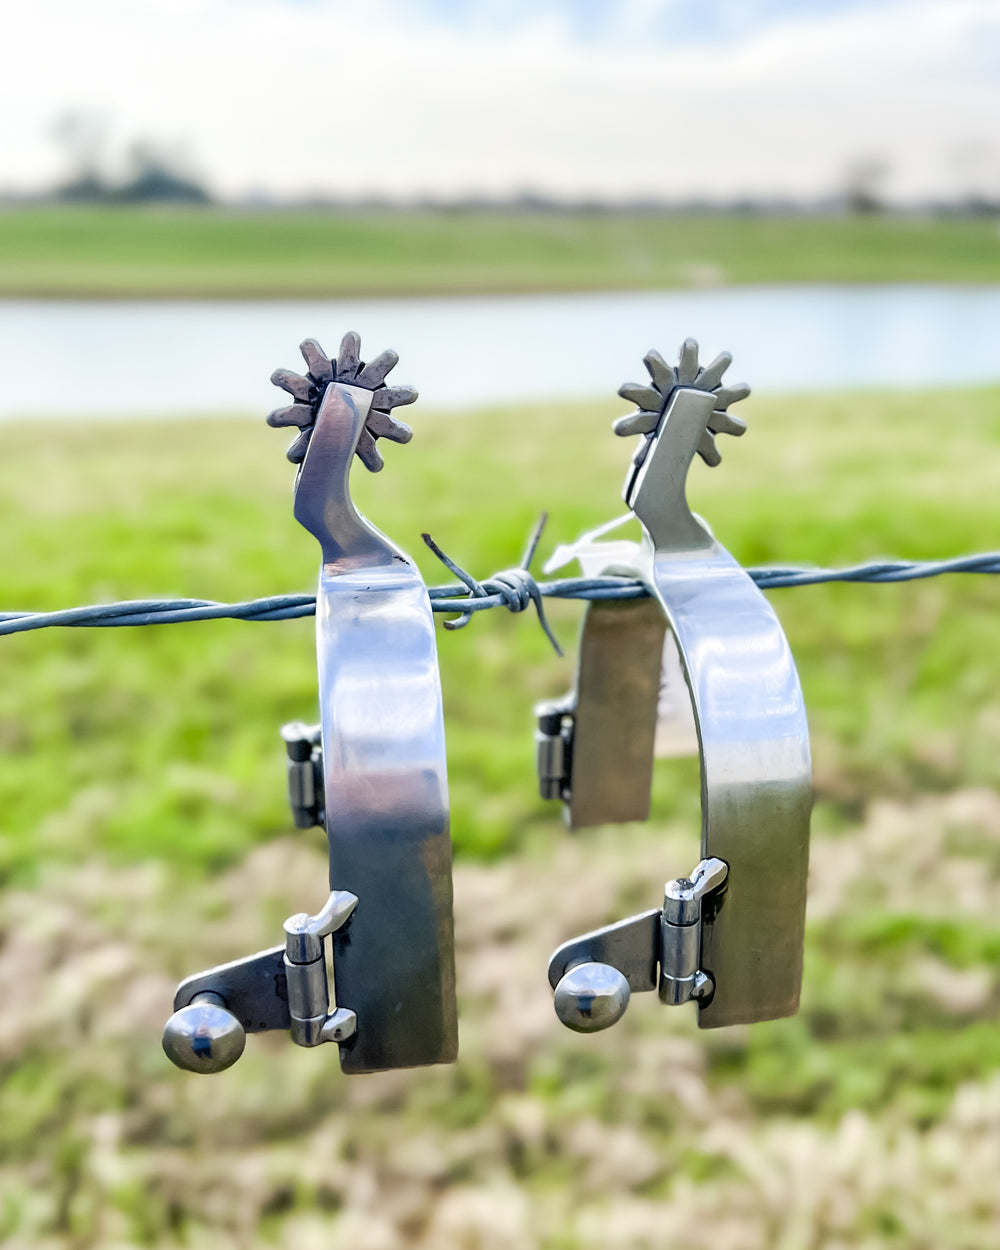 Pair of Men's Brushed Stainless Steel Spurs on a barb wire fence